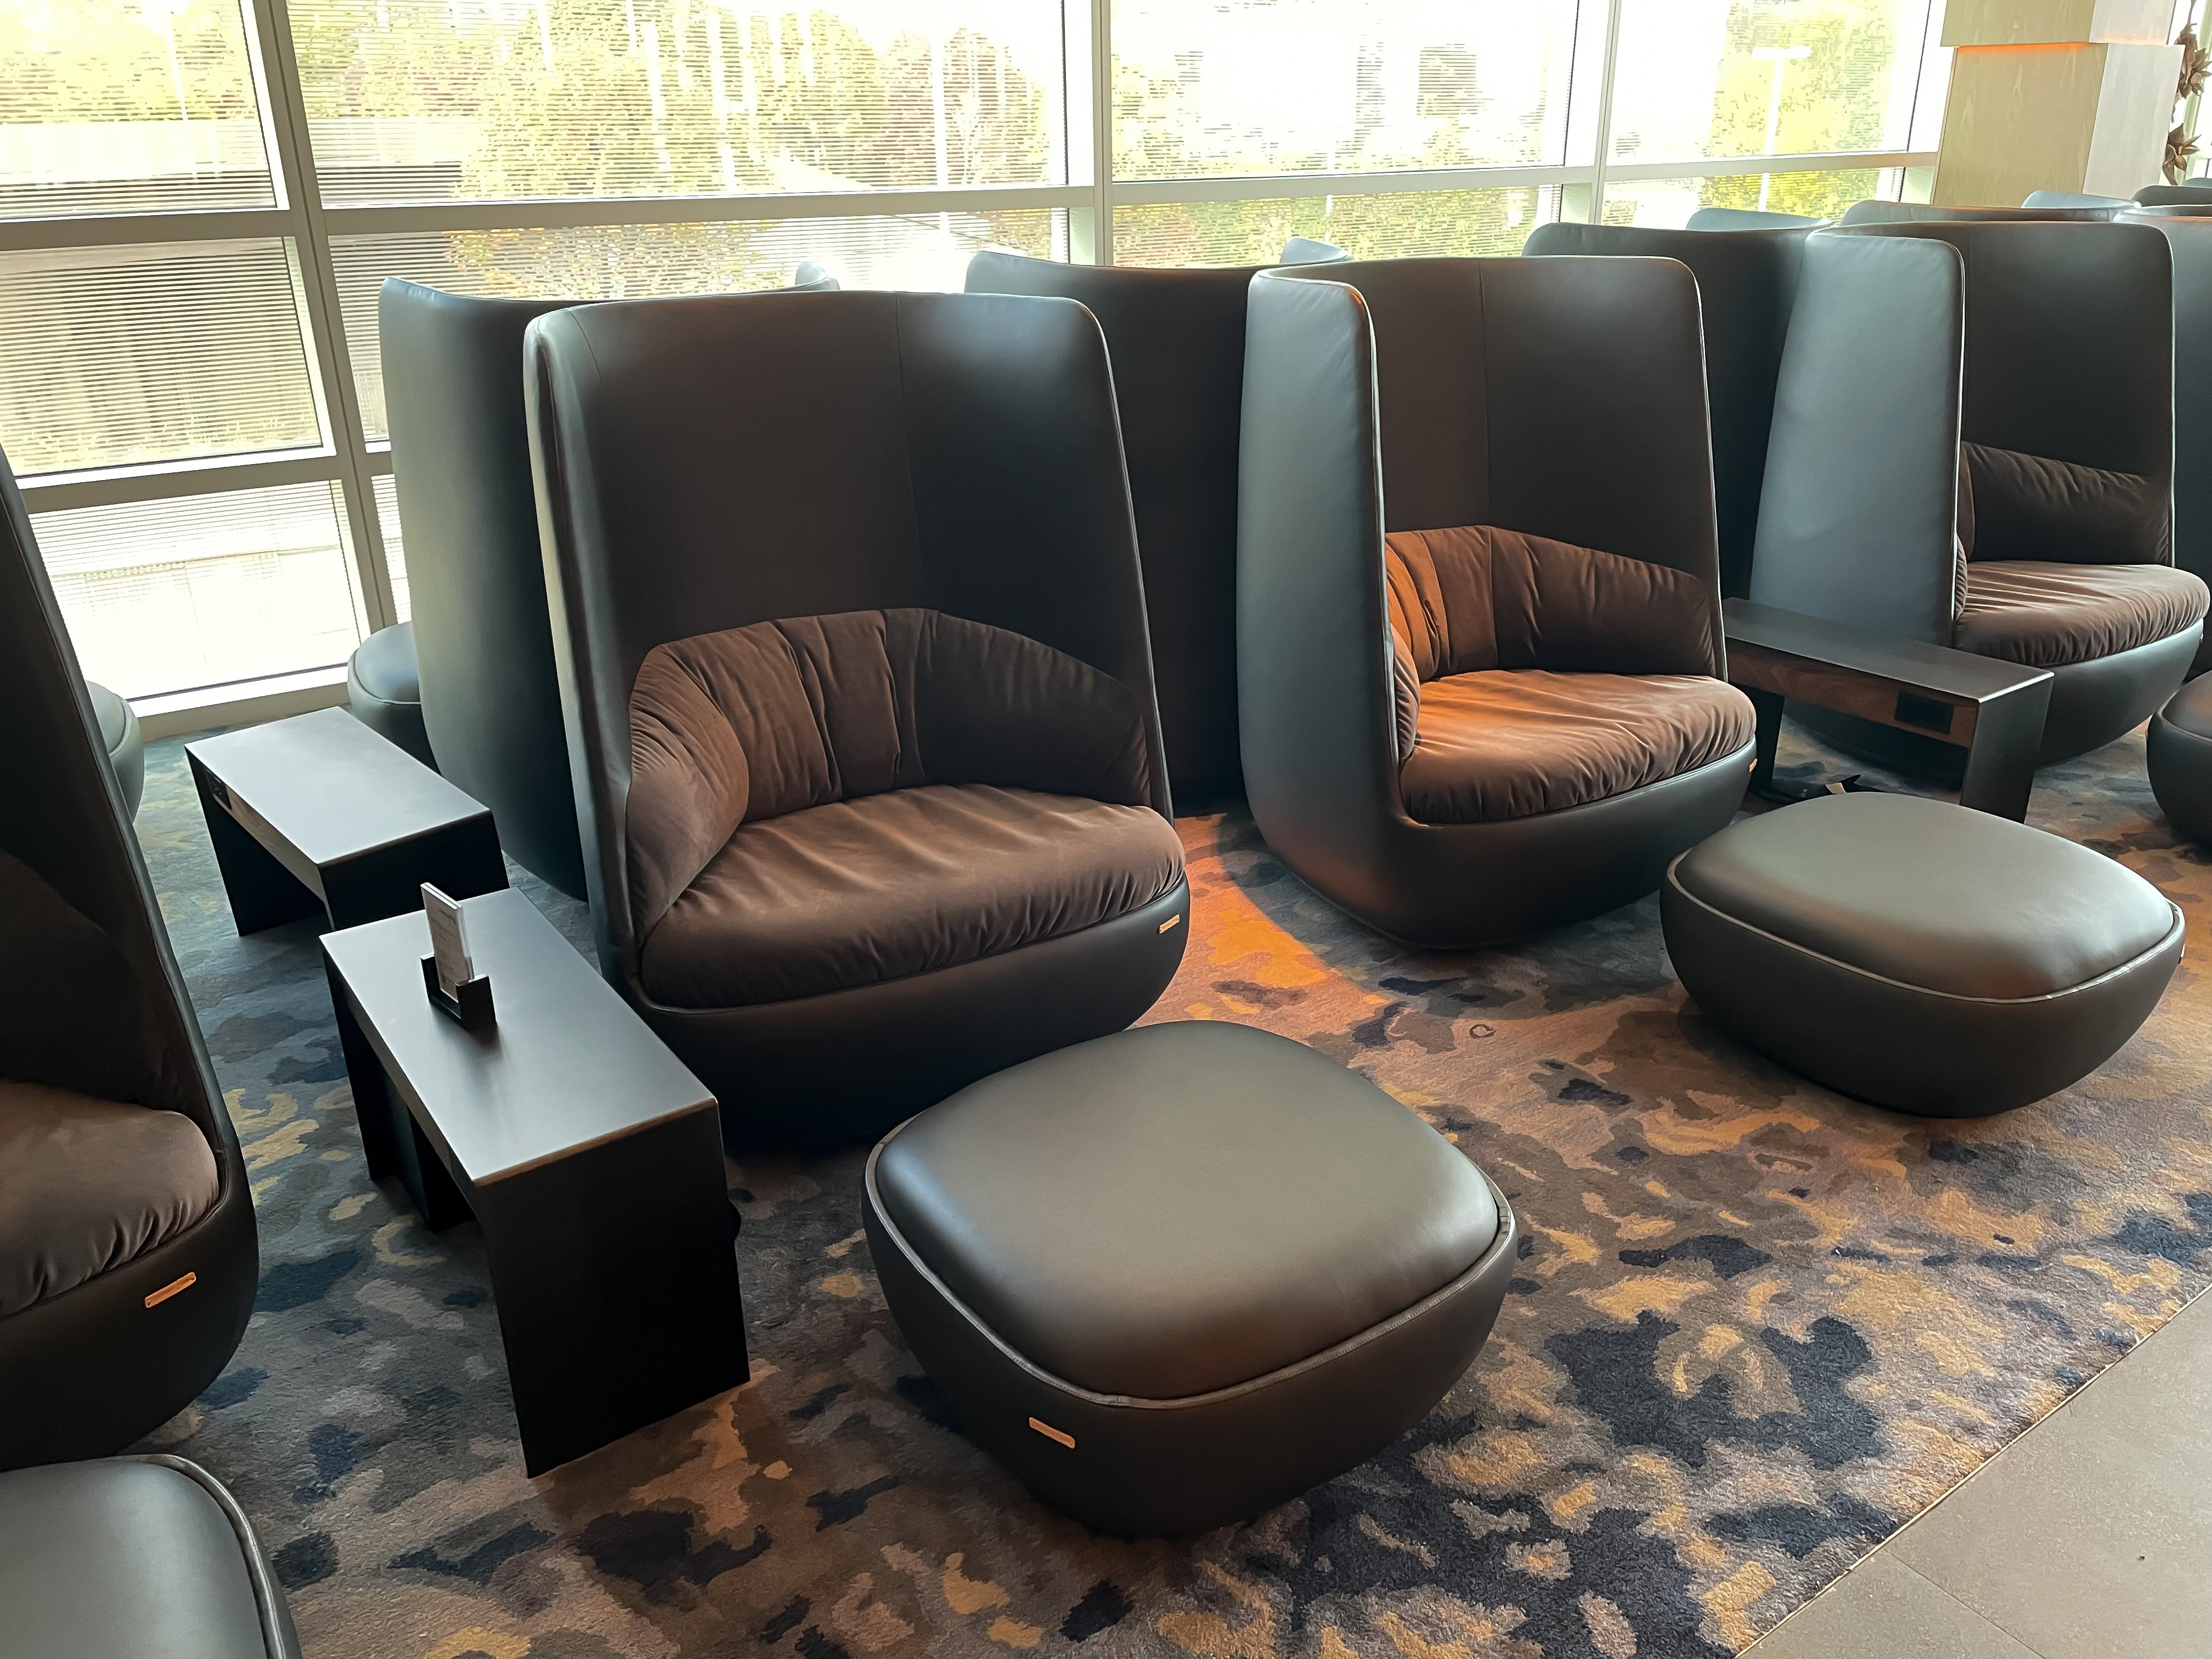 Booth-like seating with ottomans ideal for a quick rest before your next flight.